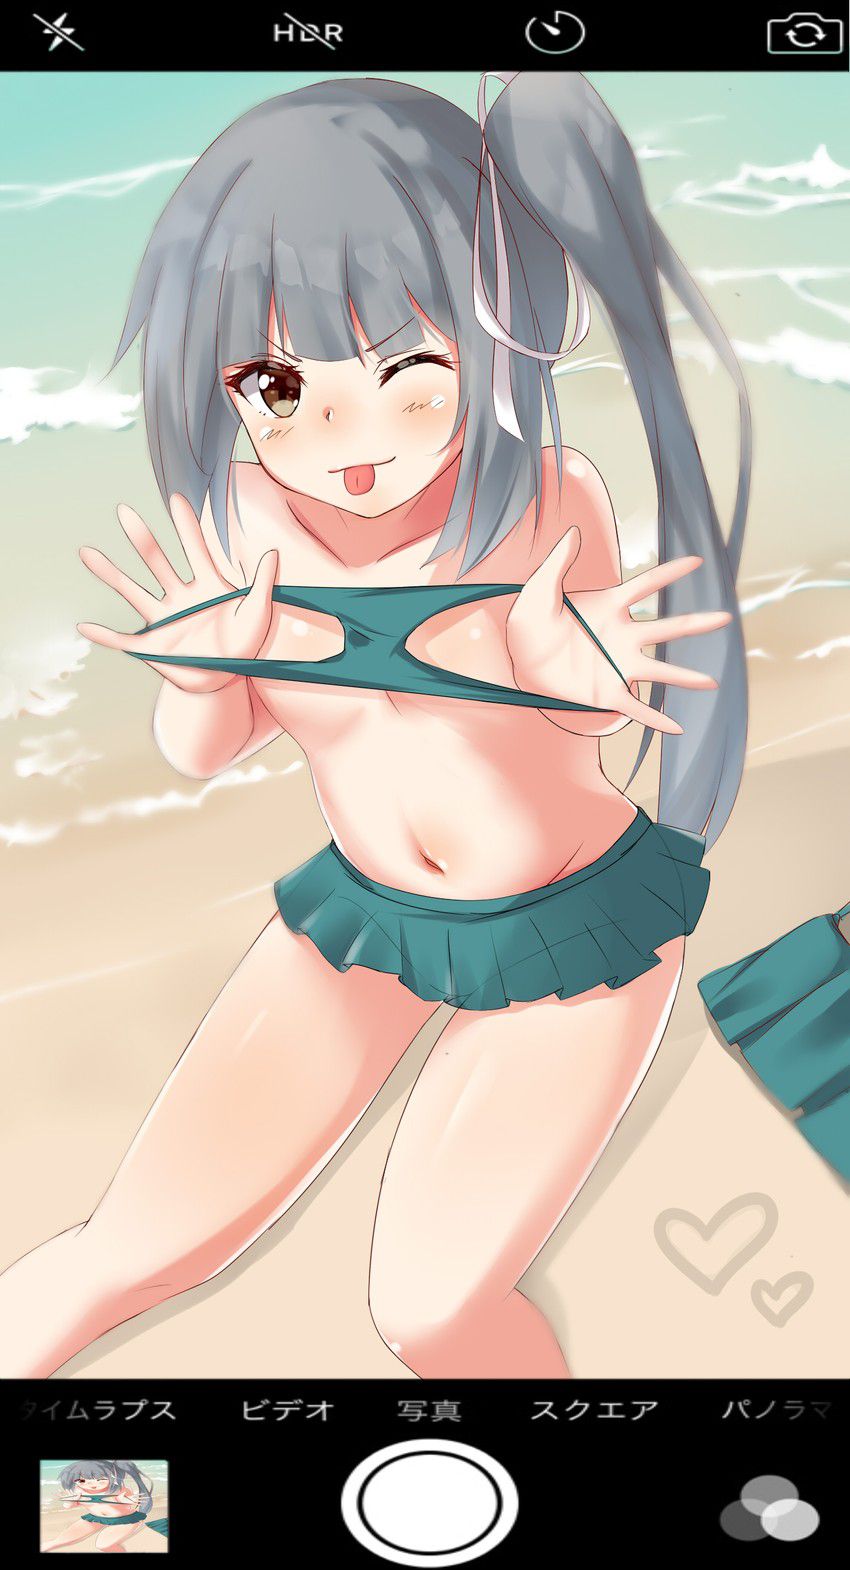 【Erotic Image】Kasumi's character image that makes you want to use it as a reference for Fleet Kokushon's erotic cosplay 3